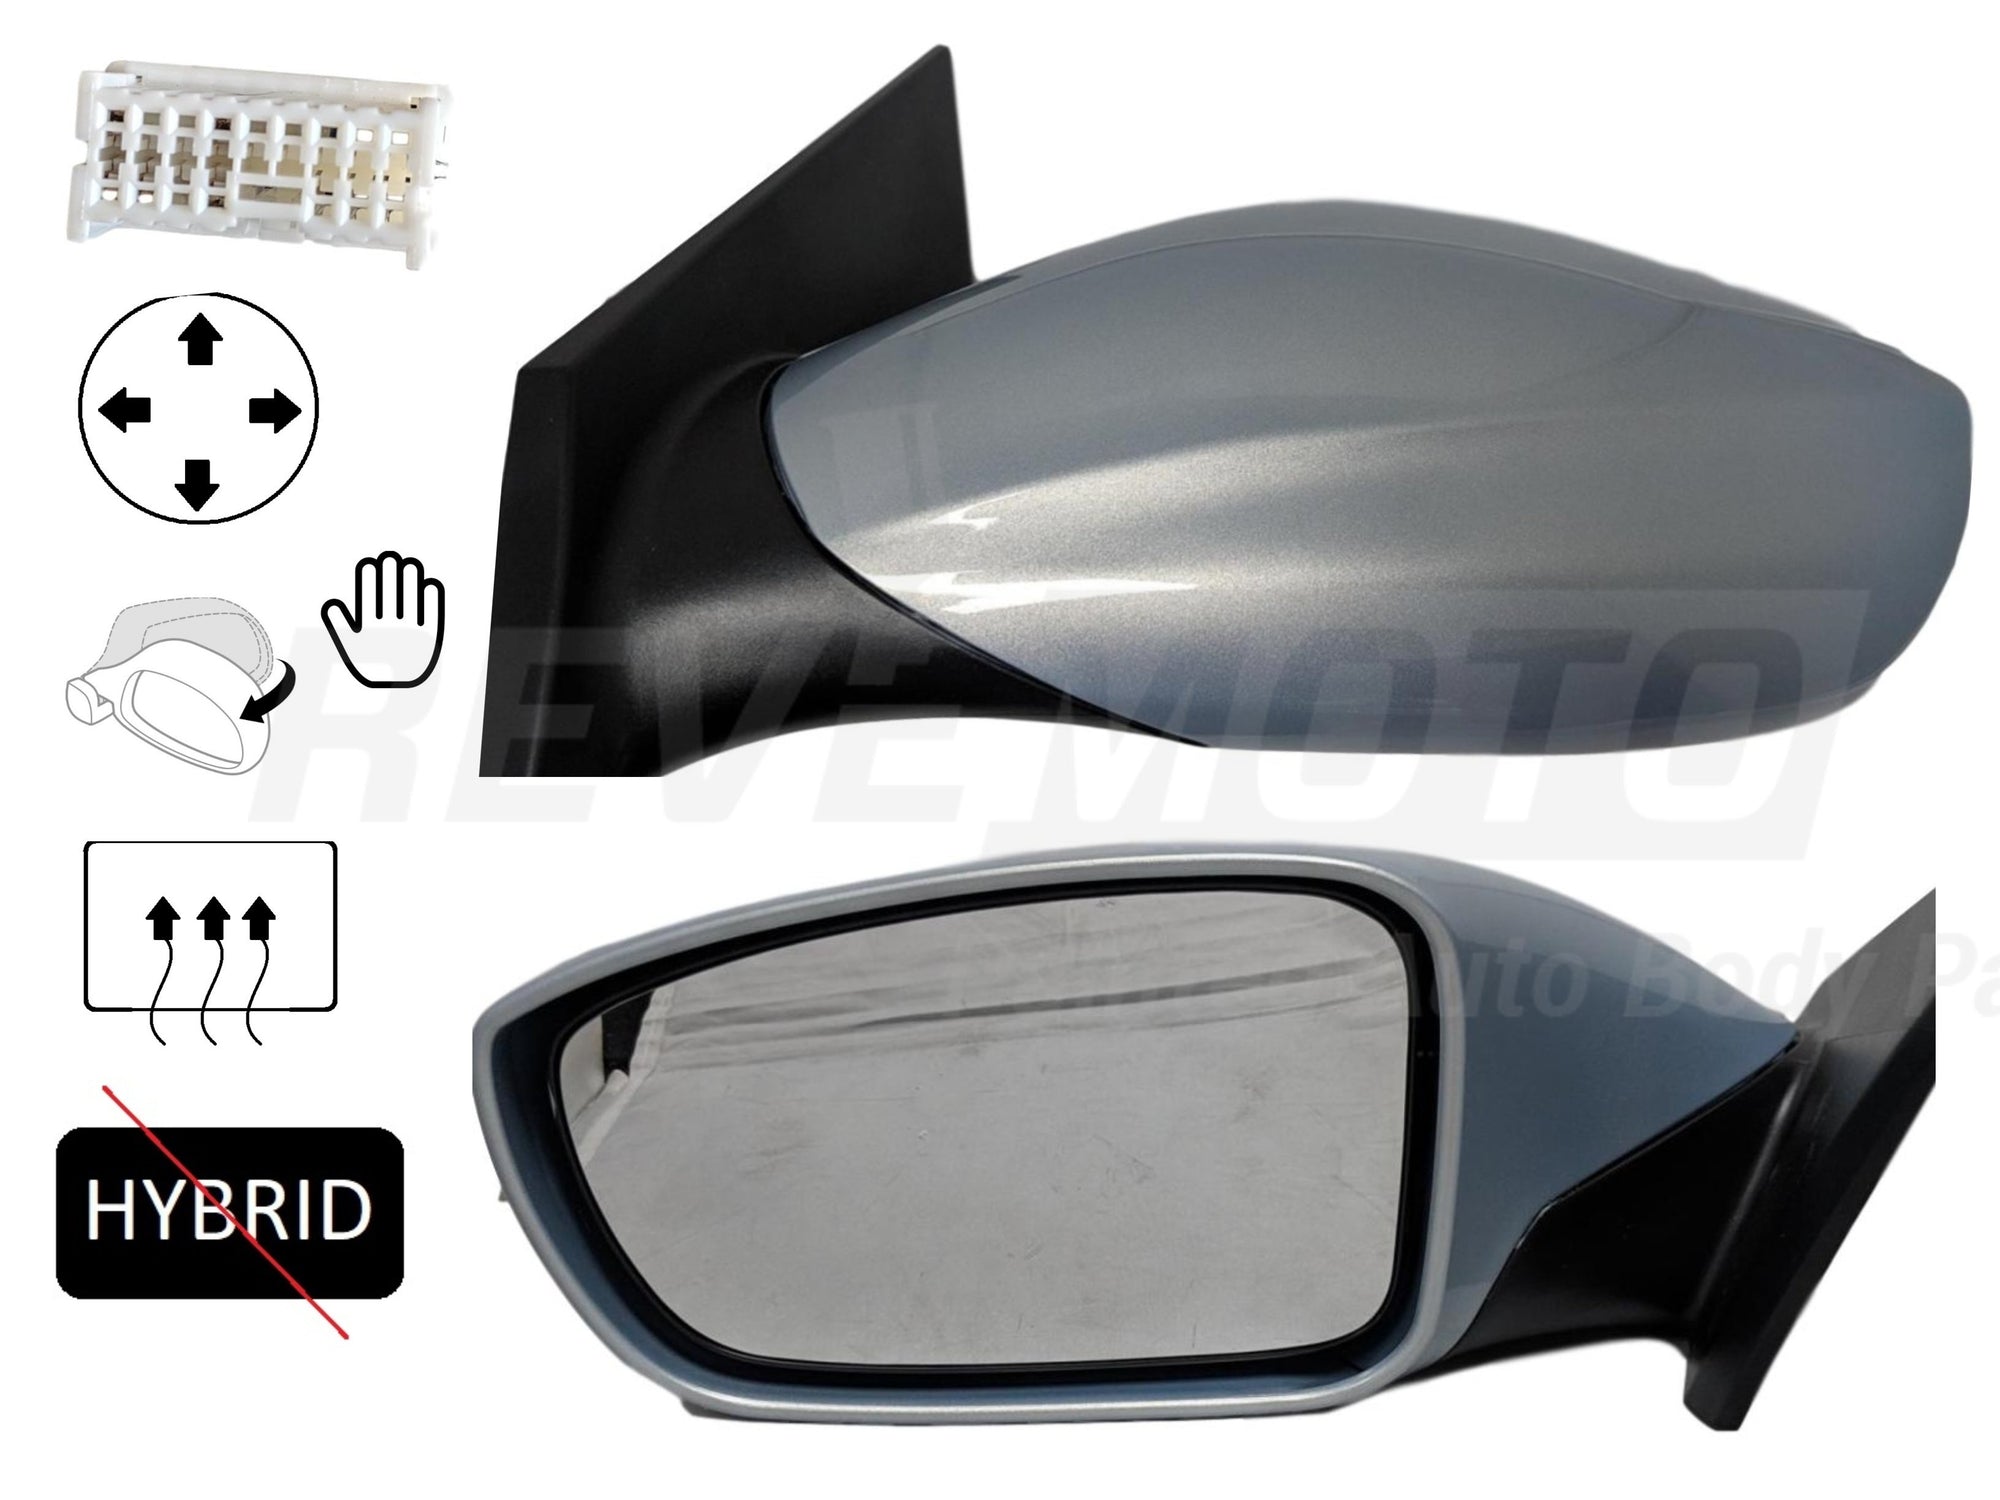 2014_Hyundai_Sonata_Driver_Side_View_Mirror_Heated_wo_Turn_Signal_Light_Power_Manual_Folding_Except_Hybrid_Painted_Iridescent_Silver_Blue_Pearl_Z3__876103Q010